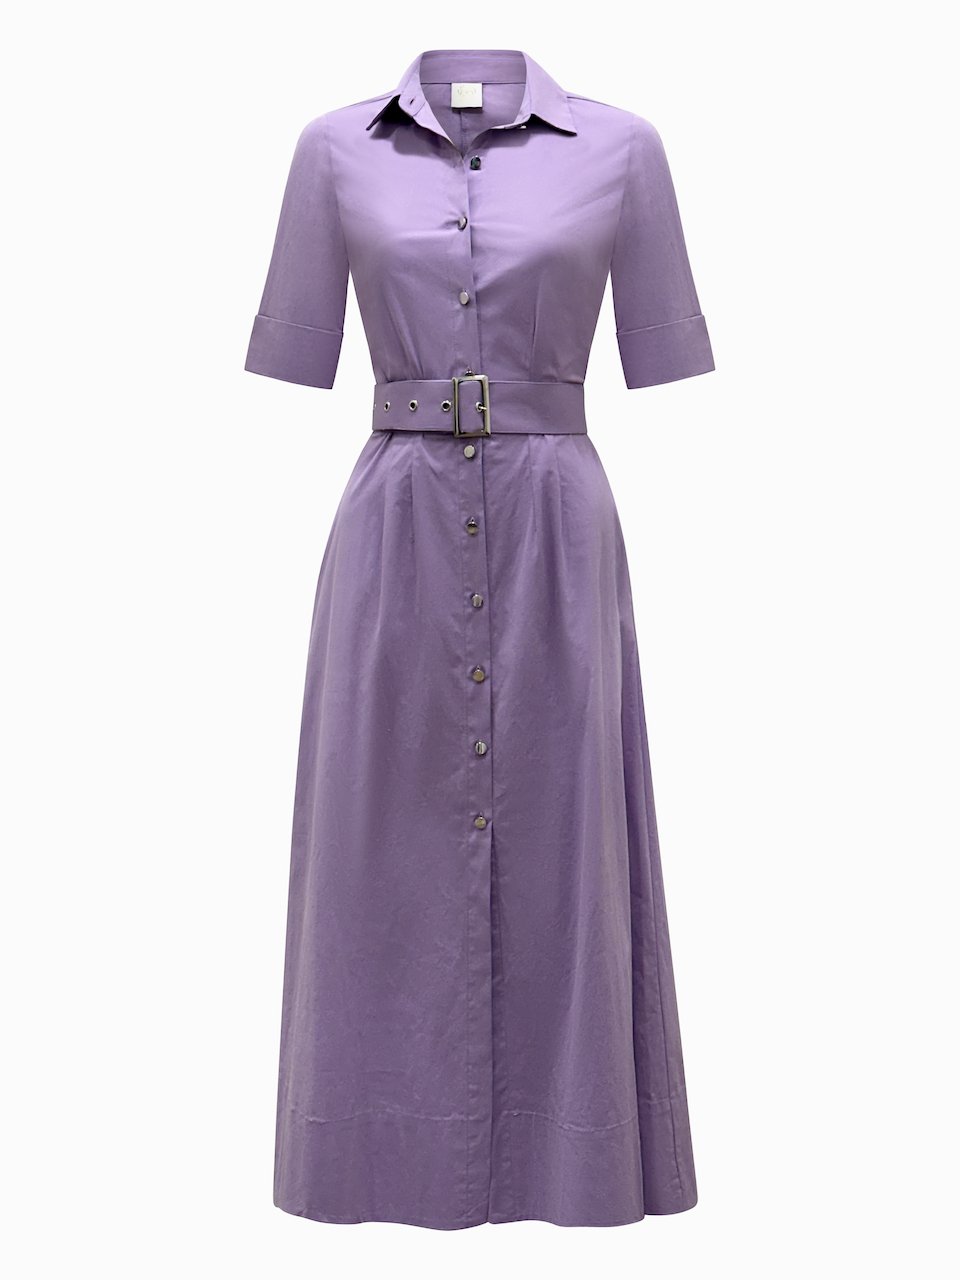 Lilac "Kate" Dress A-Line in Cotton Spandex-Why Mary-stride